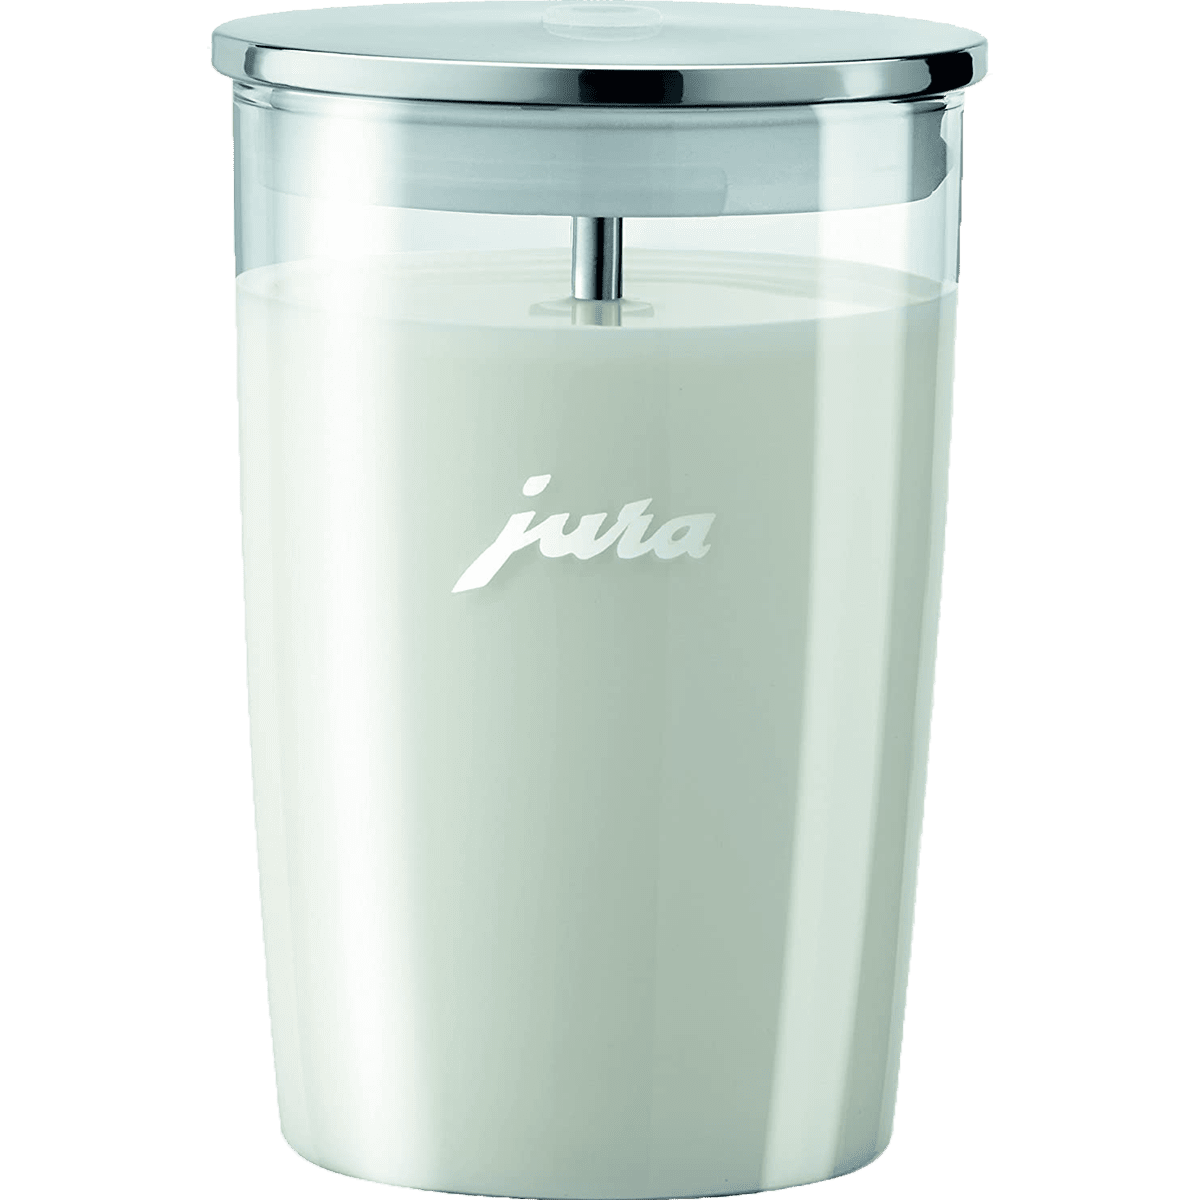 https://s3-assets.quenchessentials.com/media/images/products/jura-glass-milk-container-with-milk.png